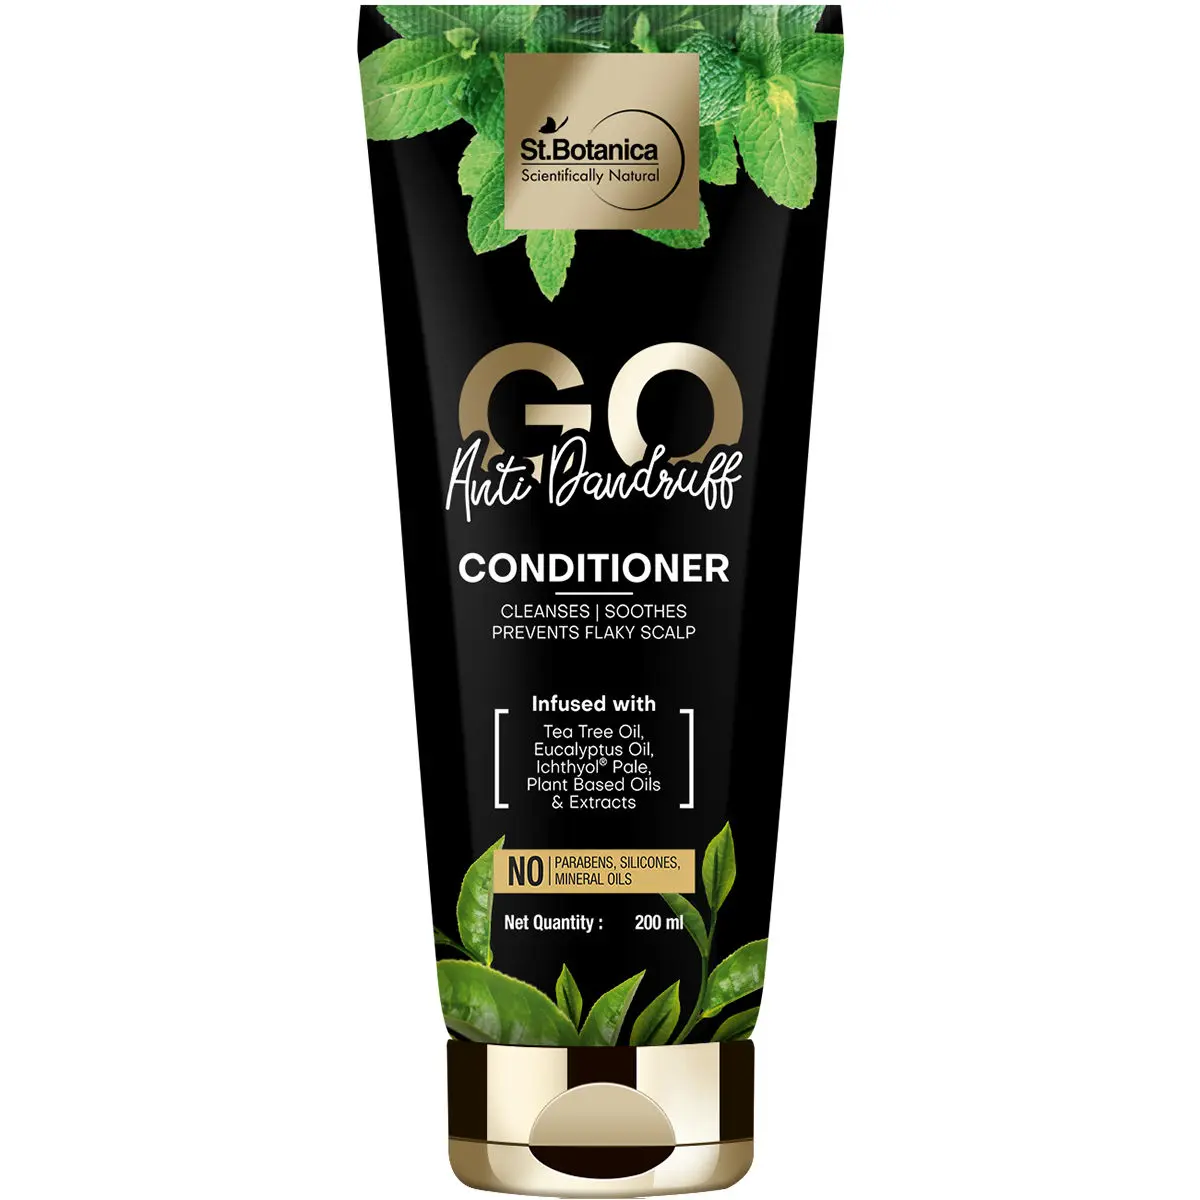 StBotanica GO Anti-Dandruff Hair Conditioner - With Ichthyol Pale, Tea Tree, Eucalyptus Oil, Plant Based Extracts, No SLS / Sulphate, Paraben, Silicones, Colors, 200ml